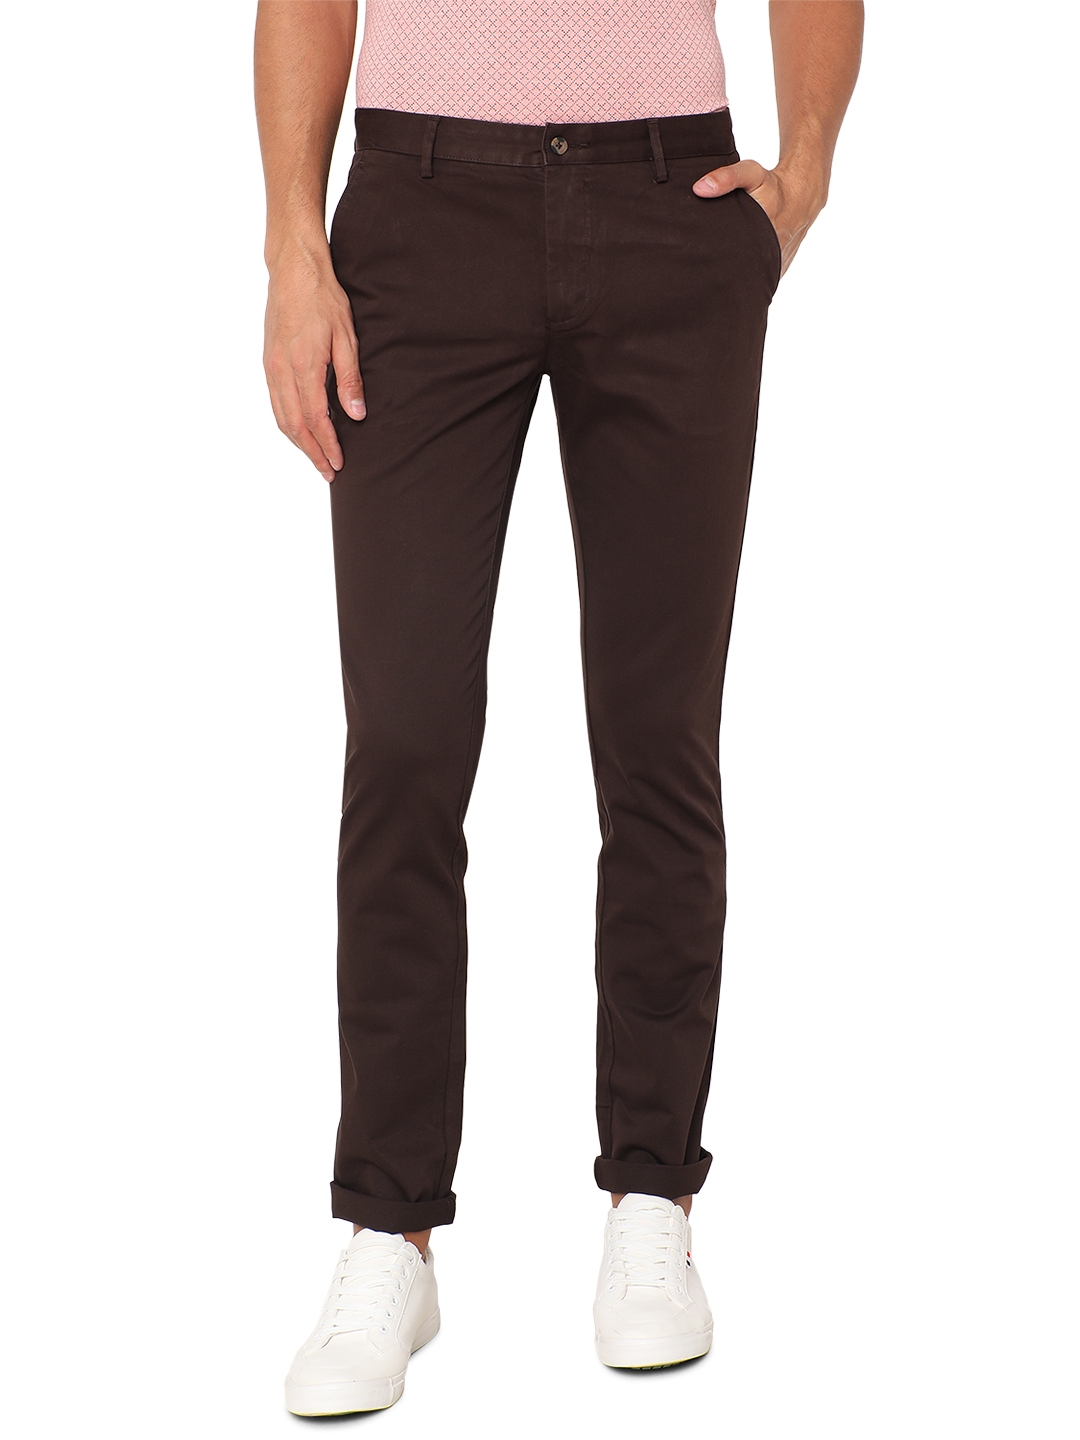 Greenfibre | Coffee Brown Solid Super Slim Fit Casual Trouser | Greenfibre